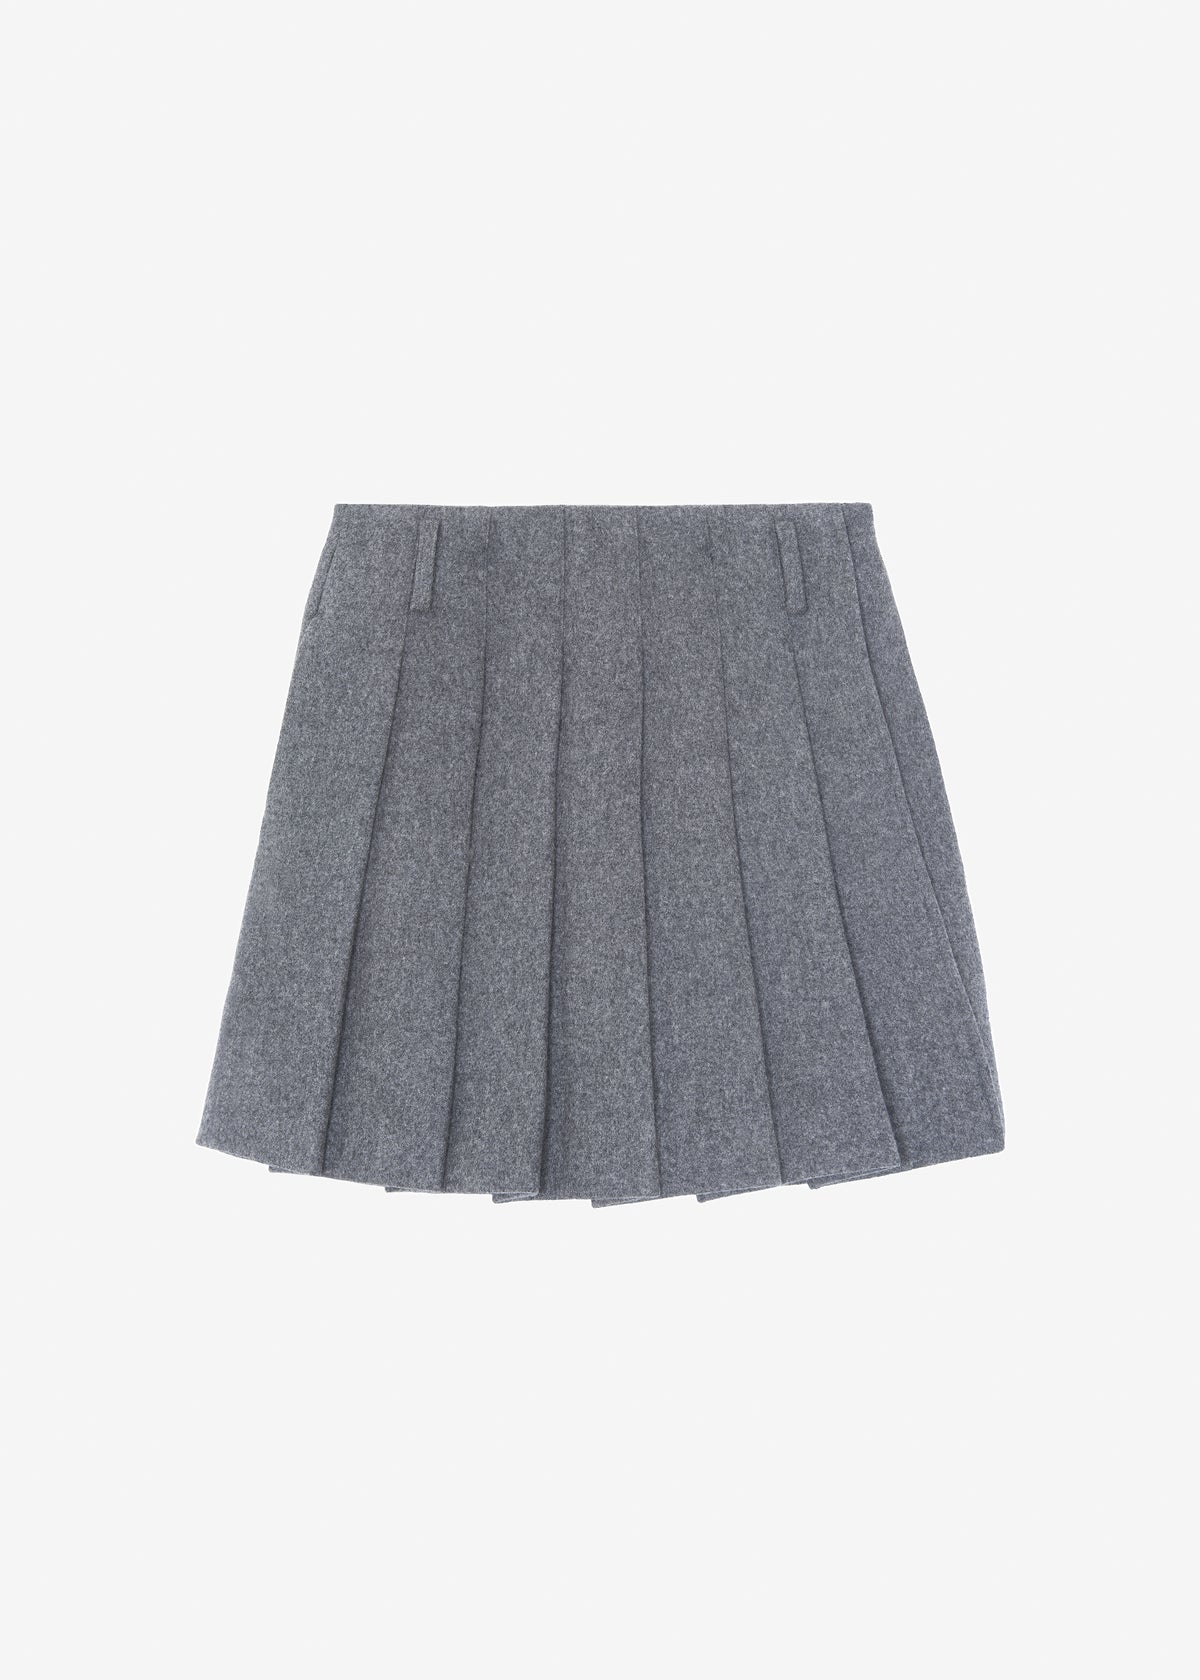 Get great deals on Tokyo Wool Pleated Skort - Grey Blossom at our